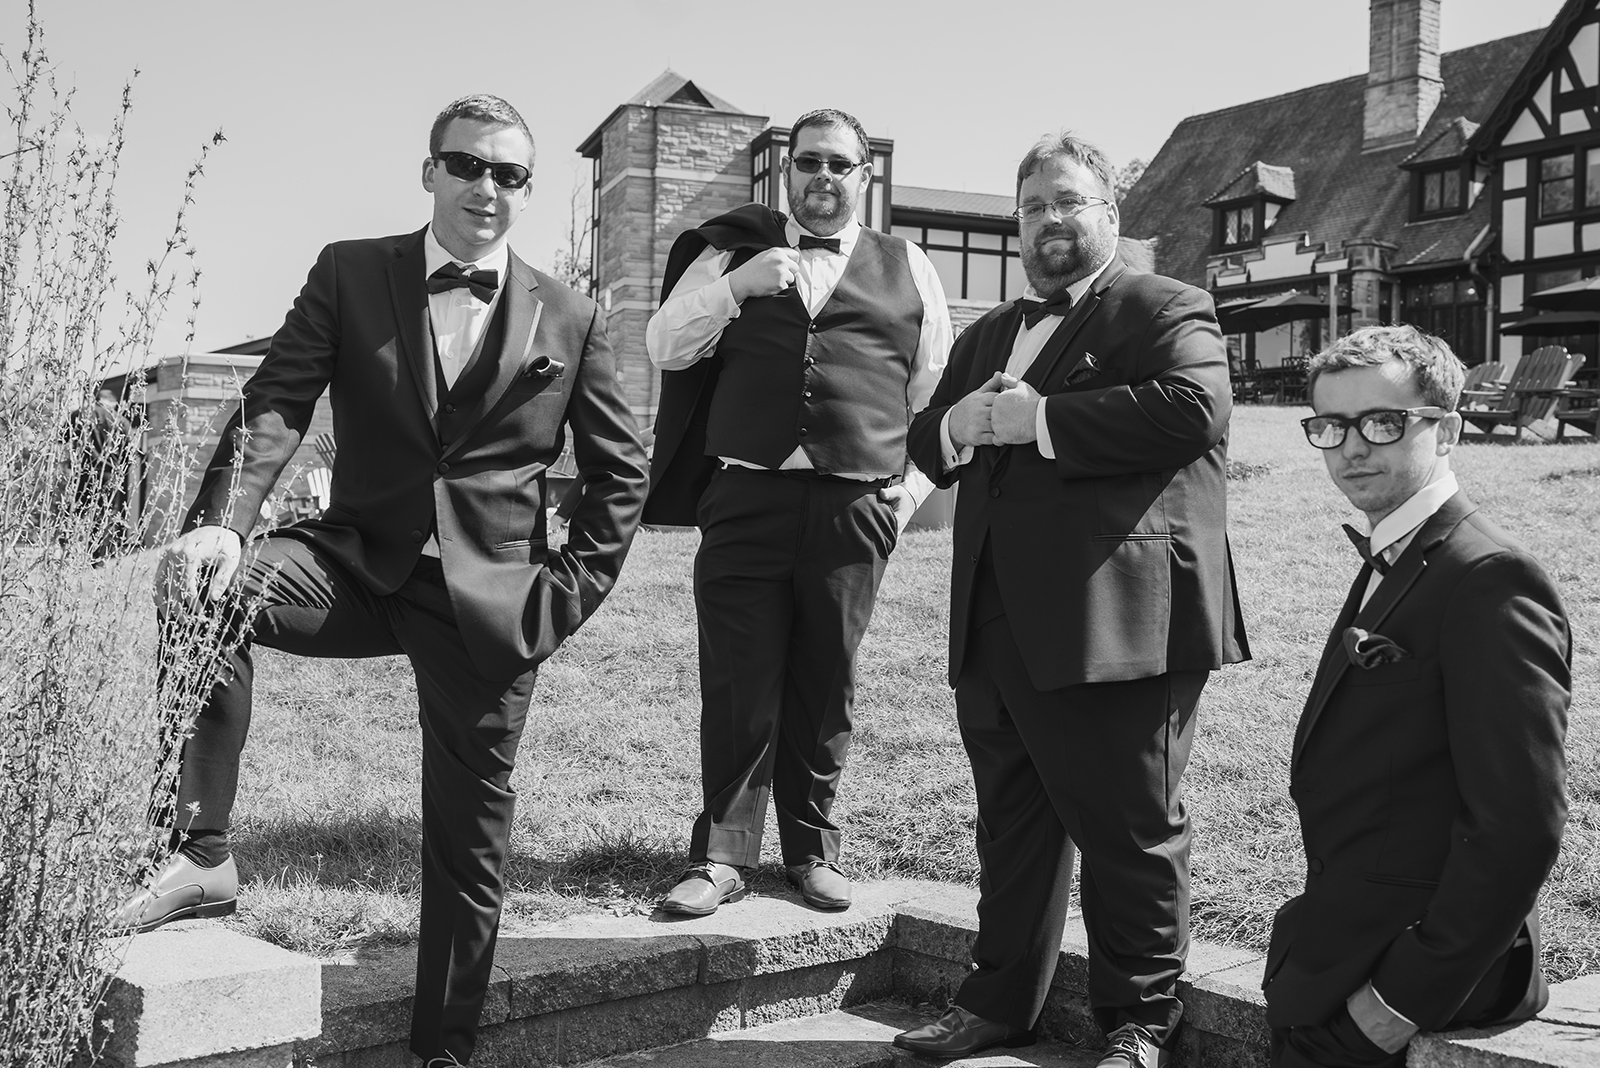 Groom and groomsmen, bridal party portrait, groomsmen pose, classic, dramatic, black and white, wedding portrait, outdoor September wedding ceremony at Punderson Manor Lodge & Conference Center, Newbury Township OH